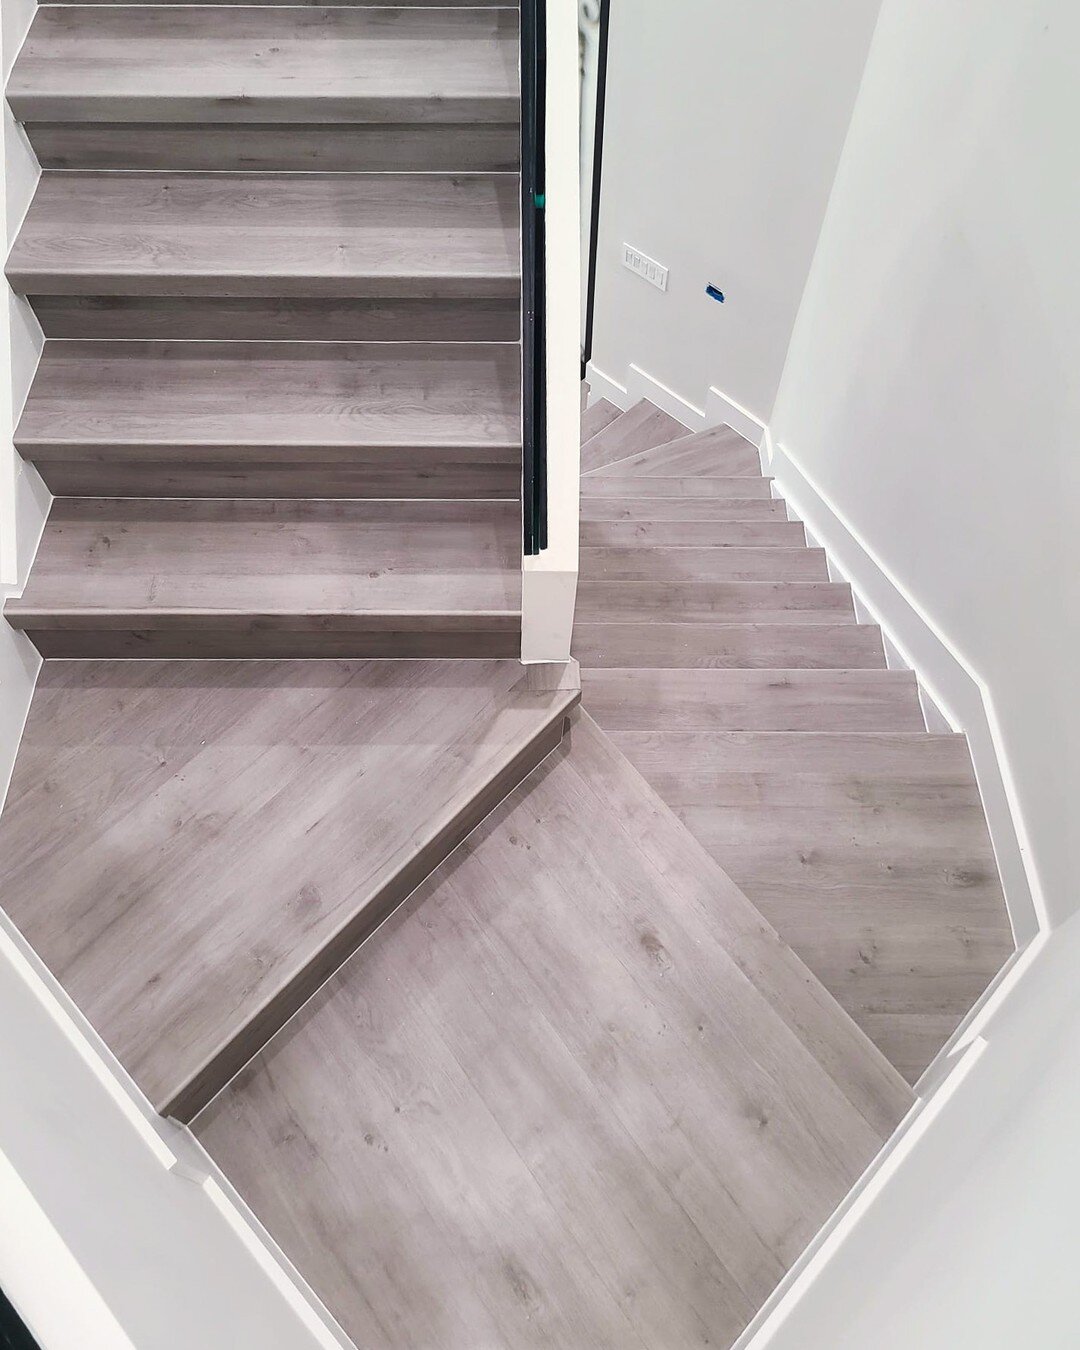 We've got all your corners covered. 

Looking for custom stairnoses to match your current home flooring? We are the solution for you. 

Link in Bio for more info.

#homesolution #stepsolution #stairsolution #steps #stepinspo #staircase #staircaseinsp